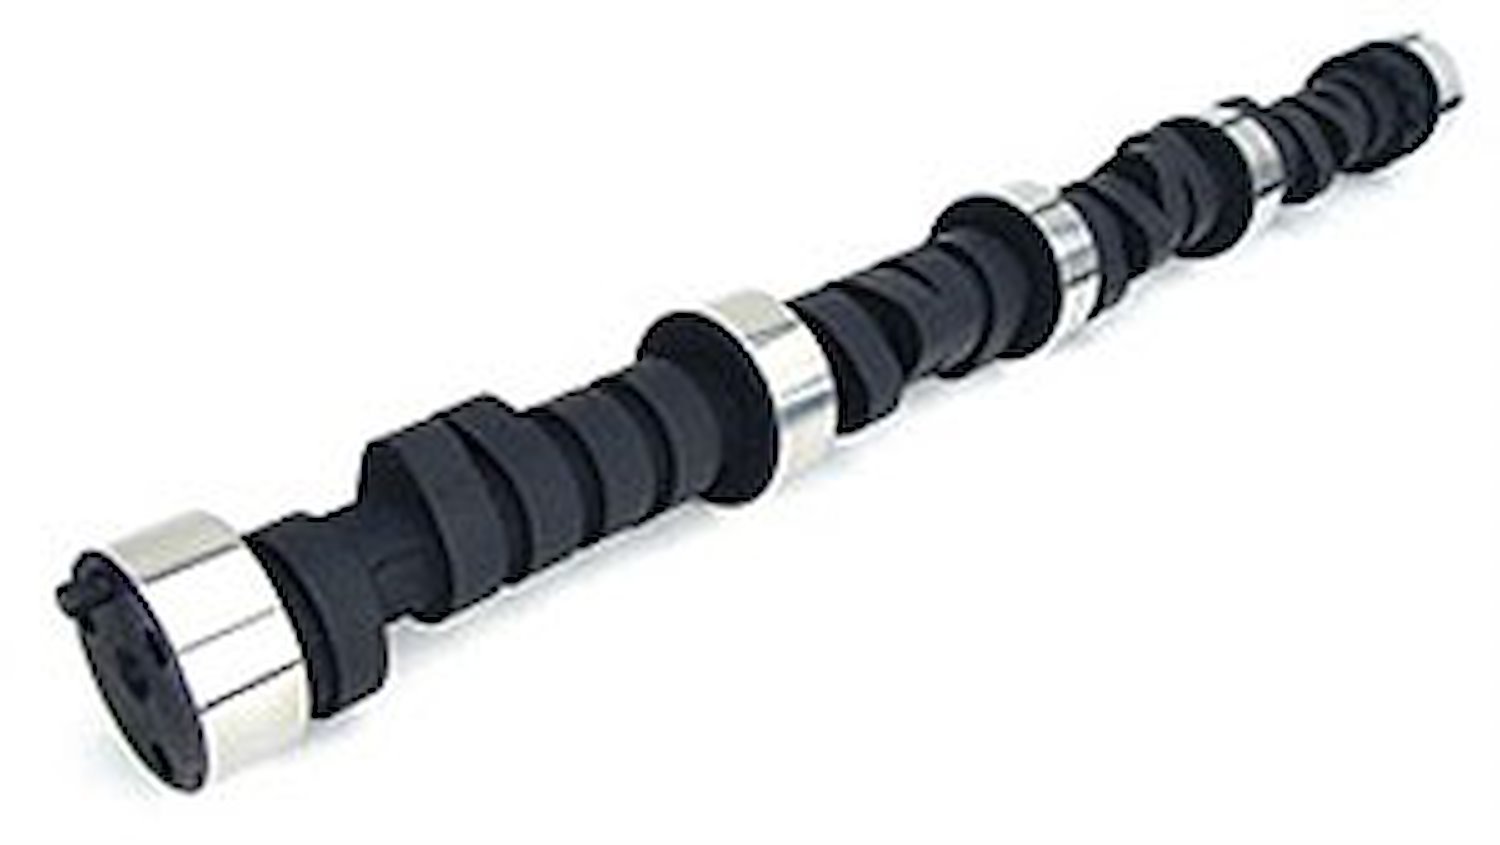 Computer Controlled Hydraulic Flat Tappet Camshaft RPM Range: 700-4700